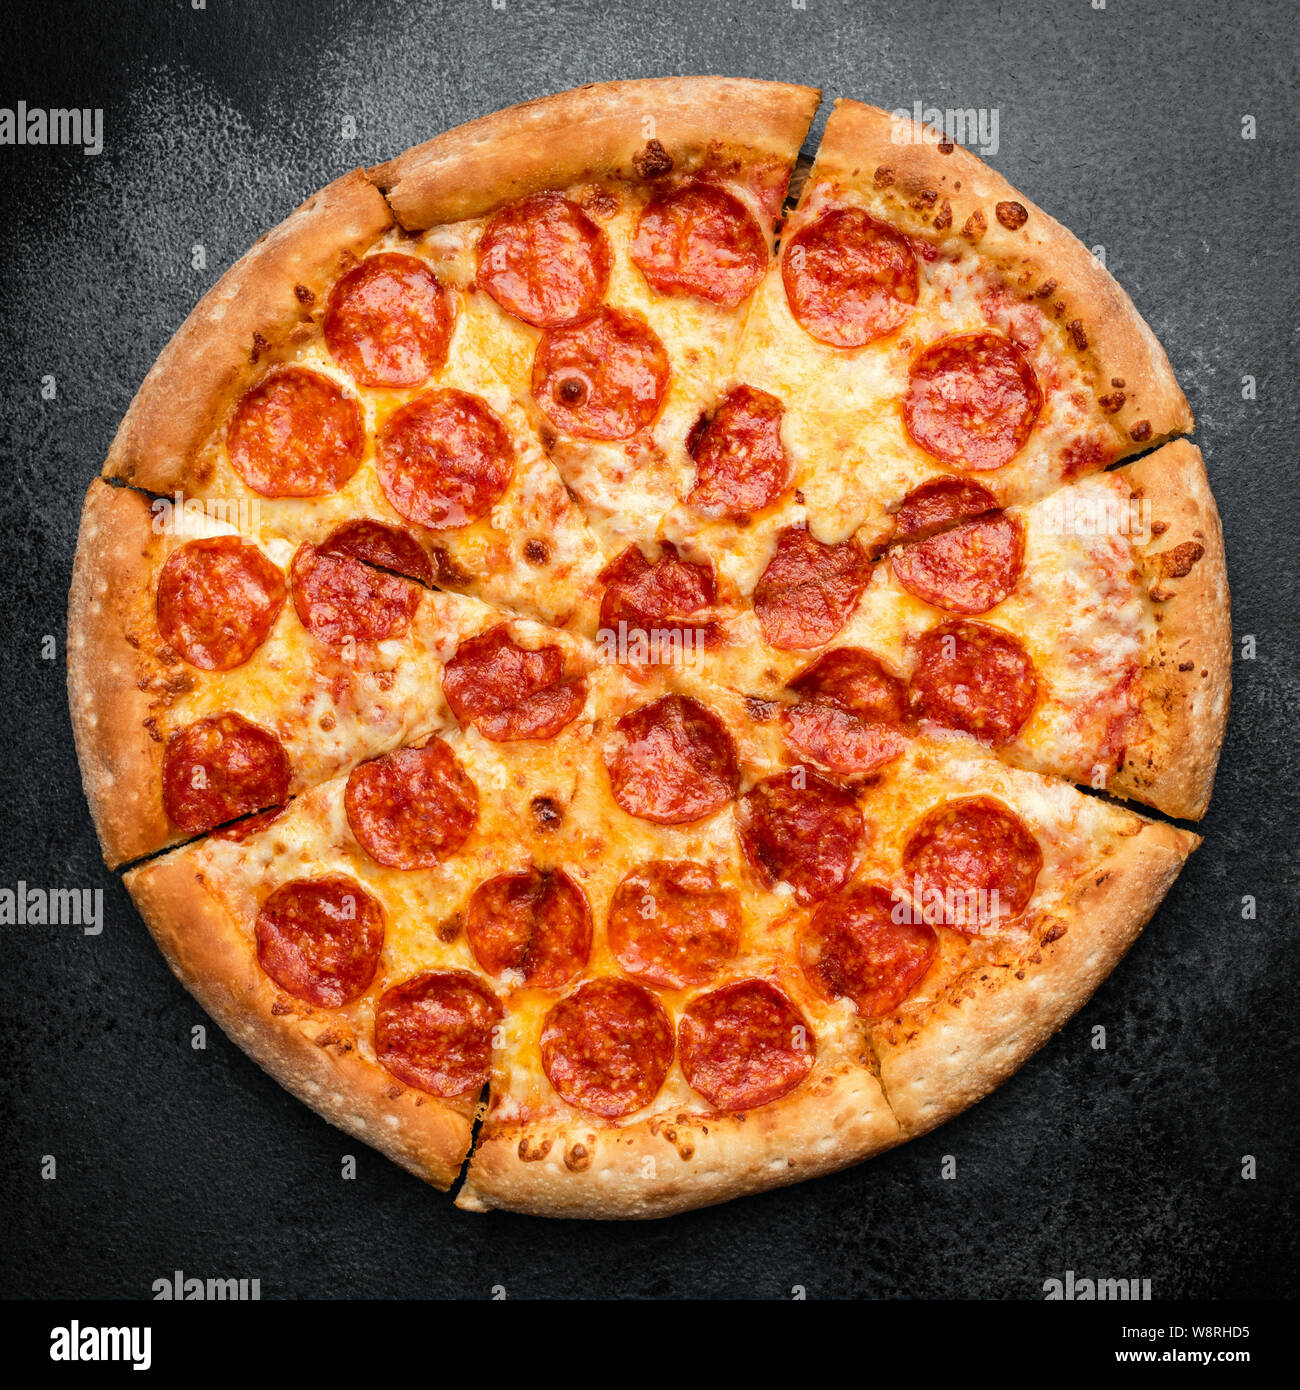 Tasty Pepperoni Pizza Sliced On Black Concrete Background. Table Top View. Fast Food Stock Photo